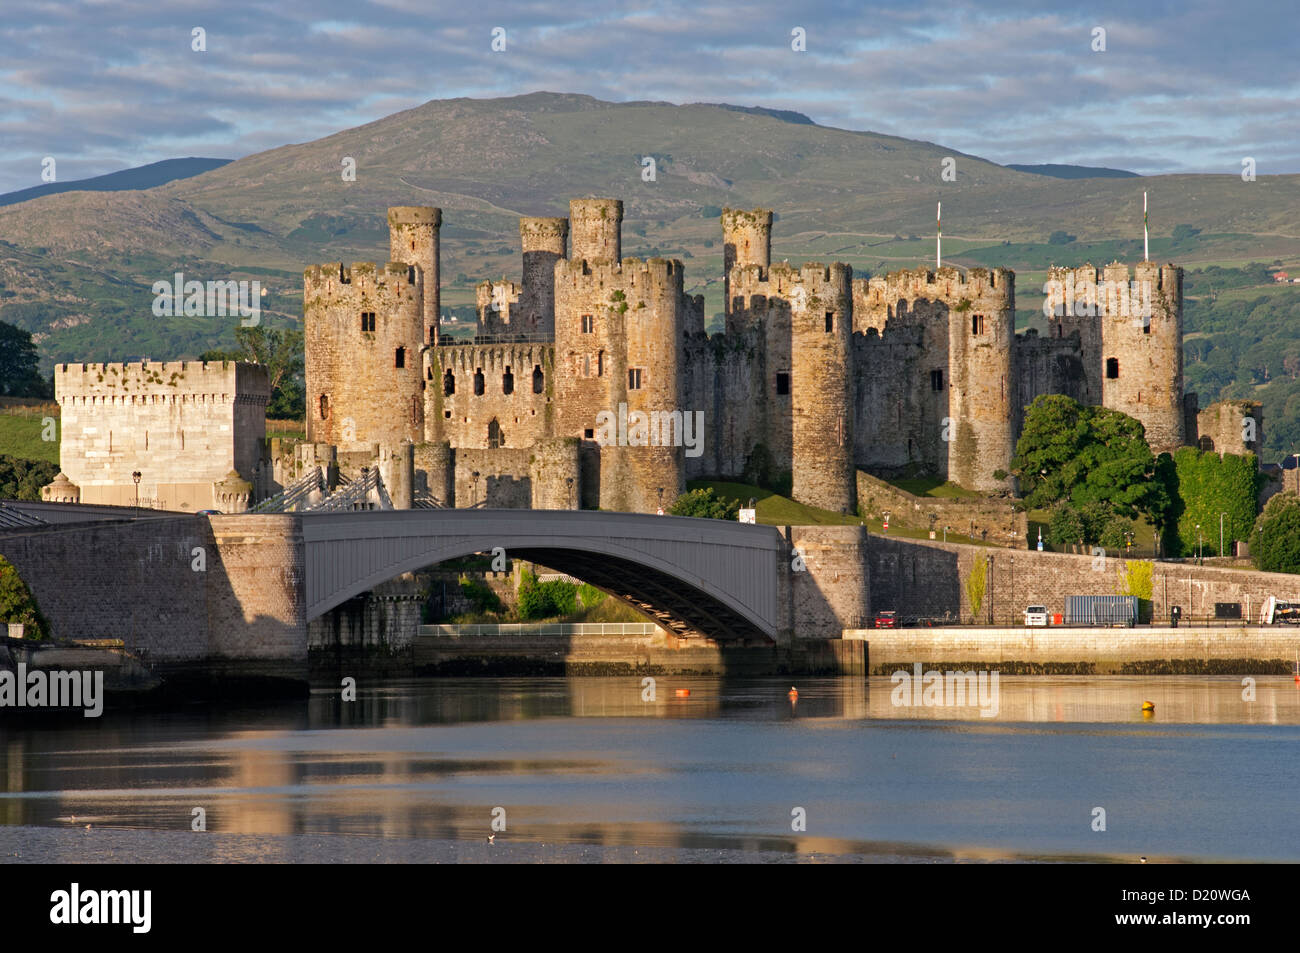 Conwy Castle and town from across the River Conwy estuary in North Wales Stock Photo